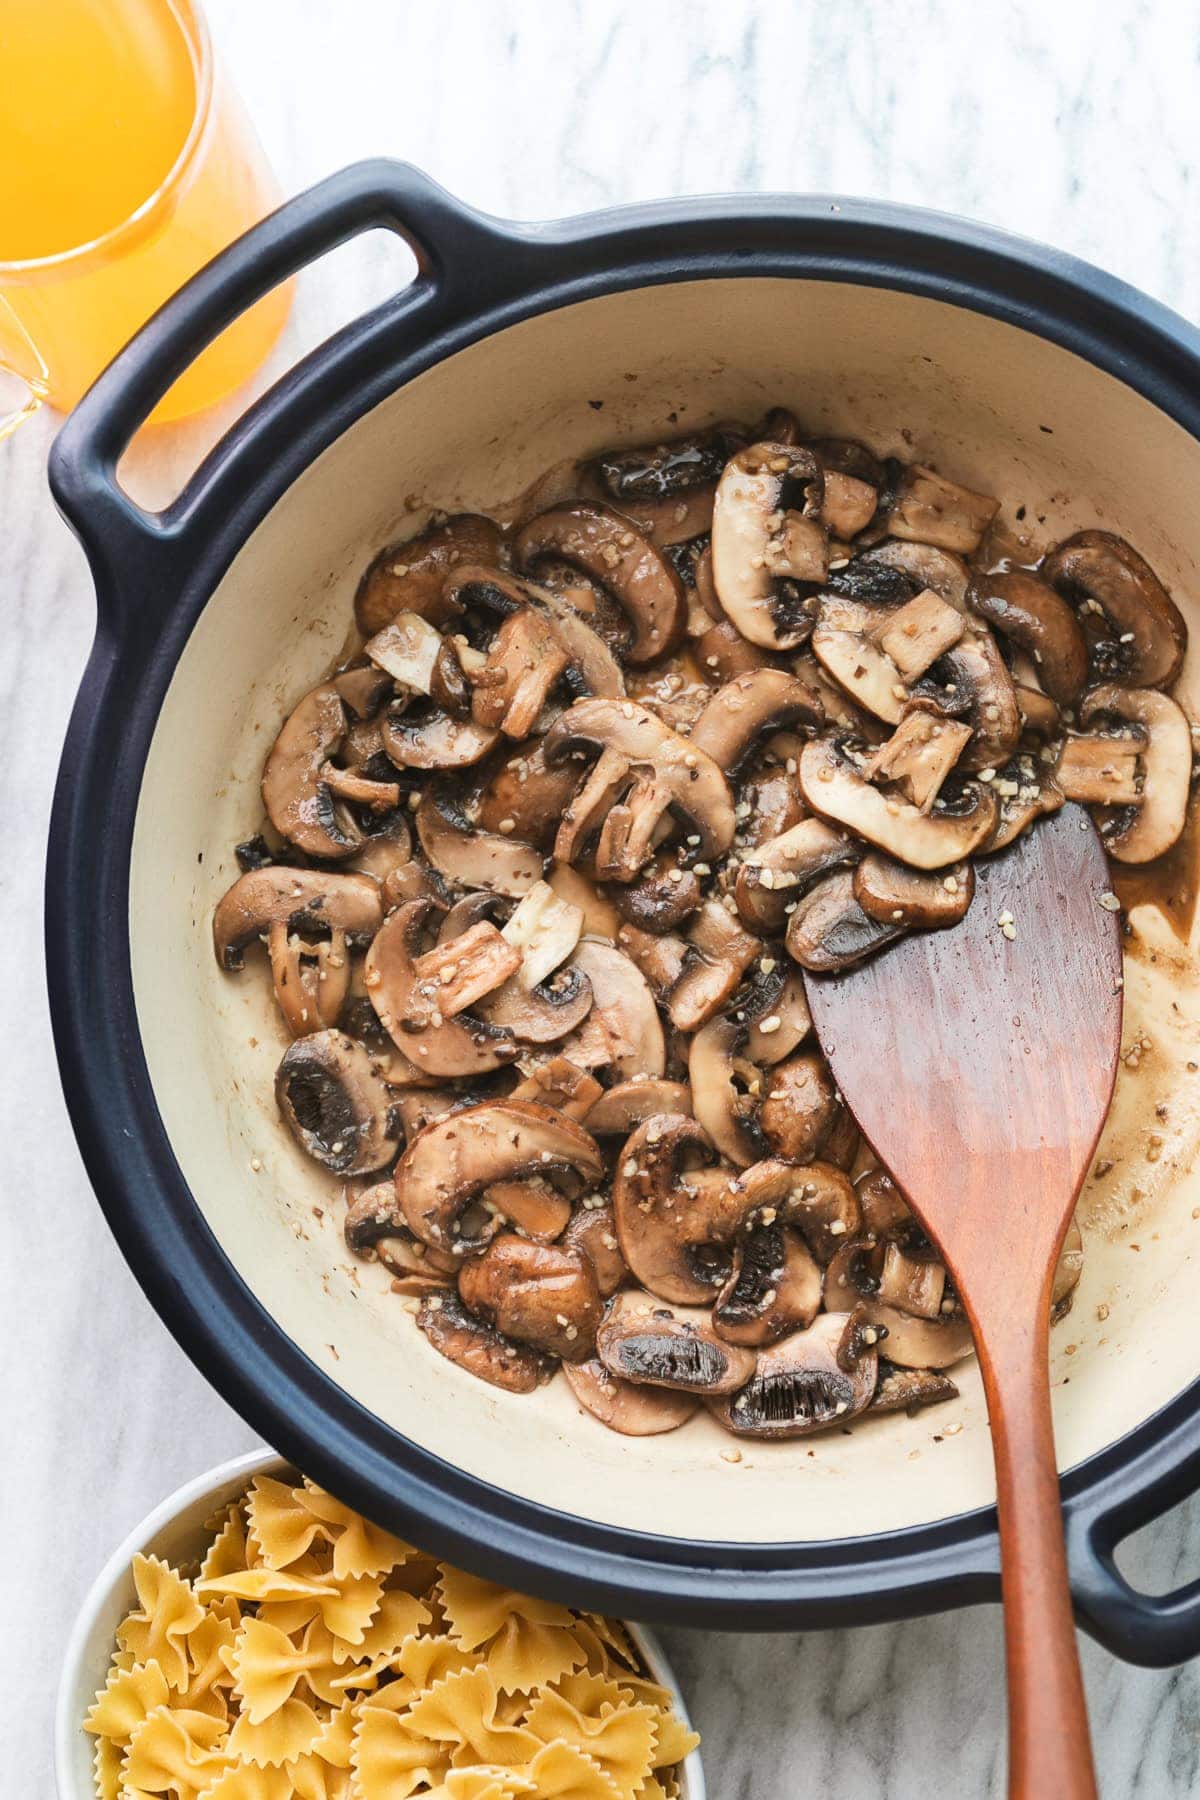 top down view of sauteed mushrooms in a pot with wooden spoon and items surrounding.